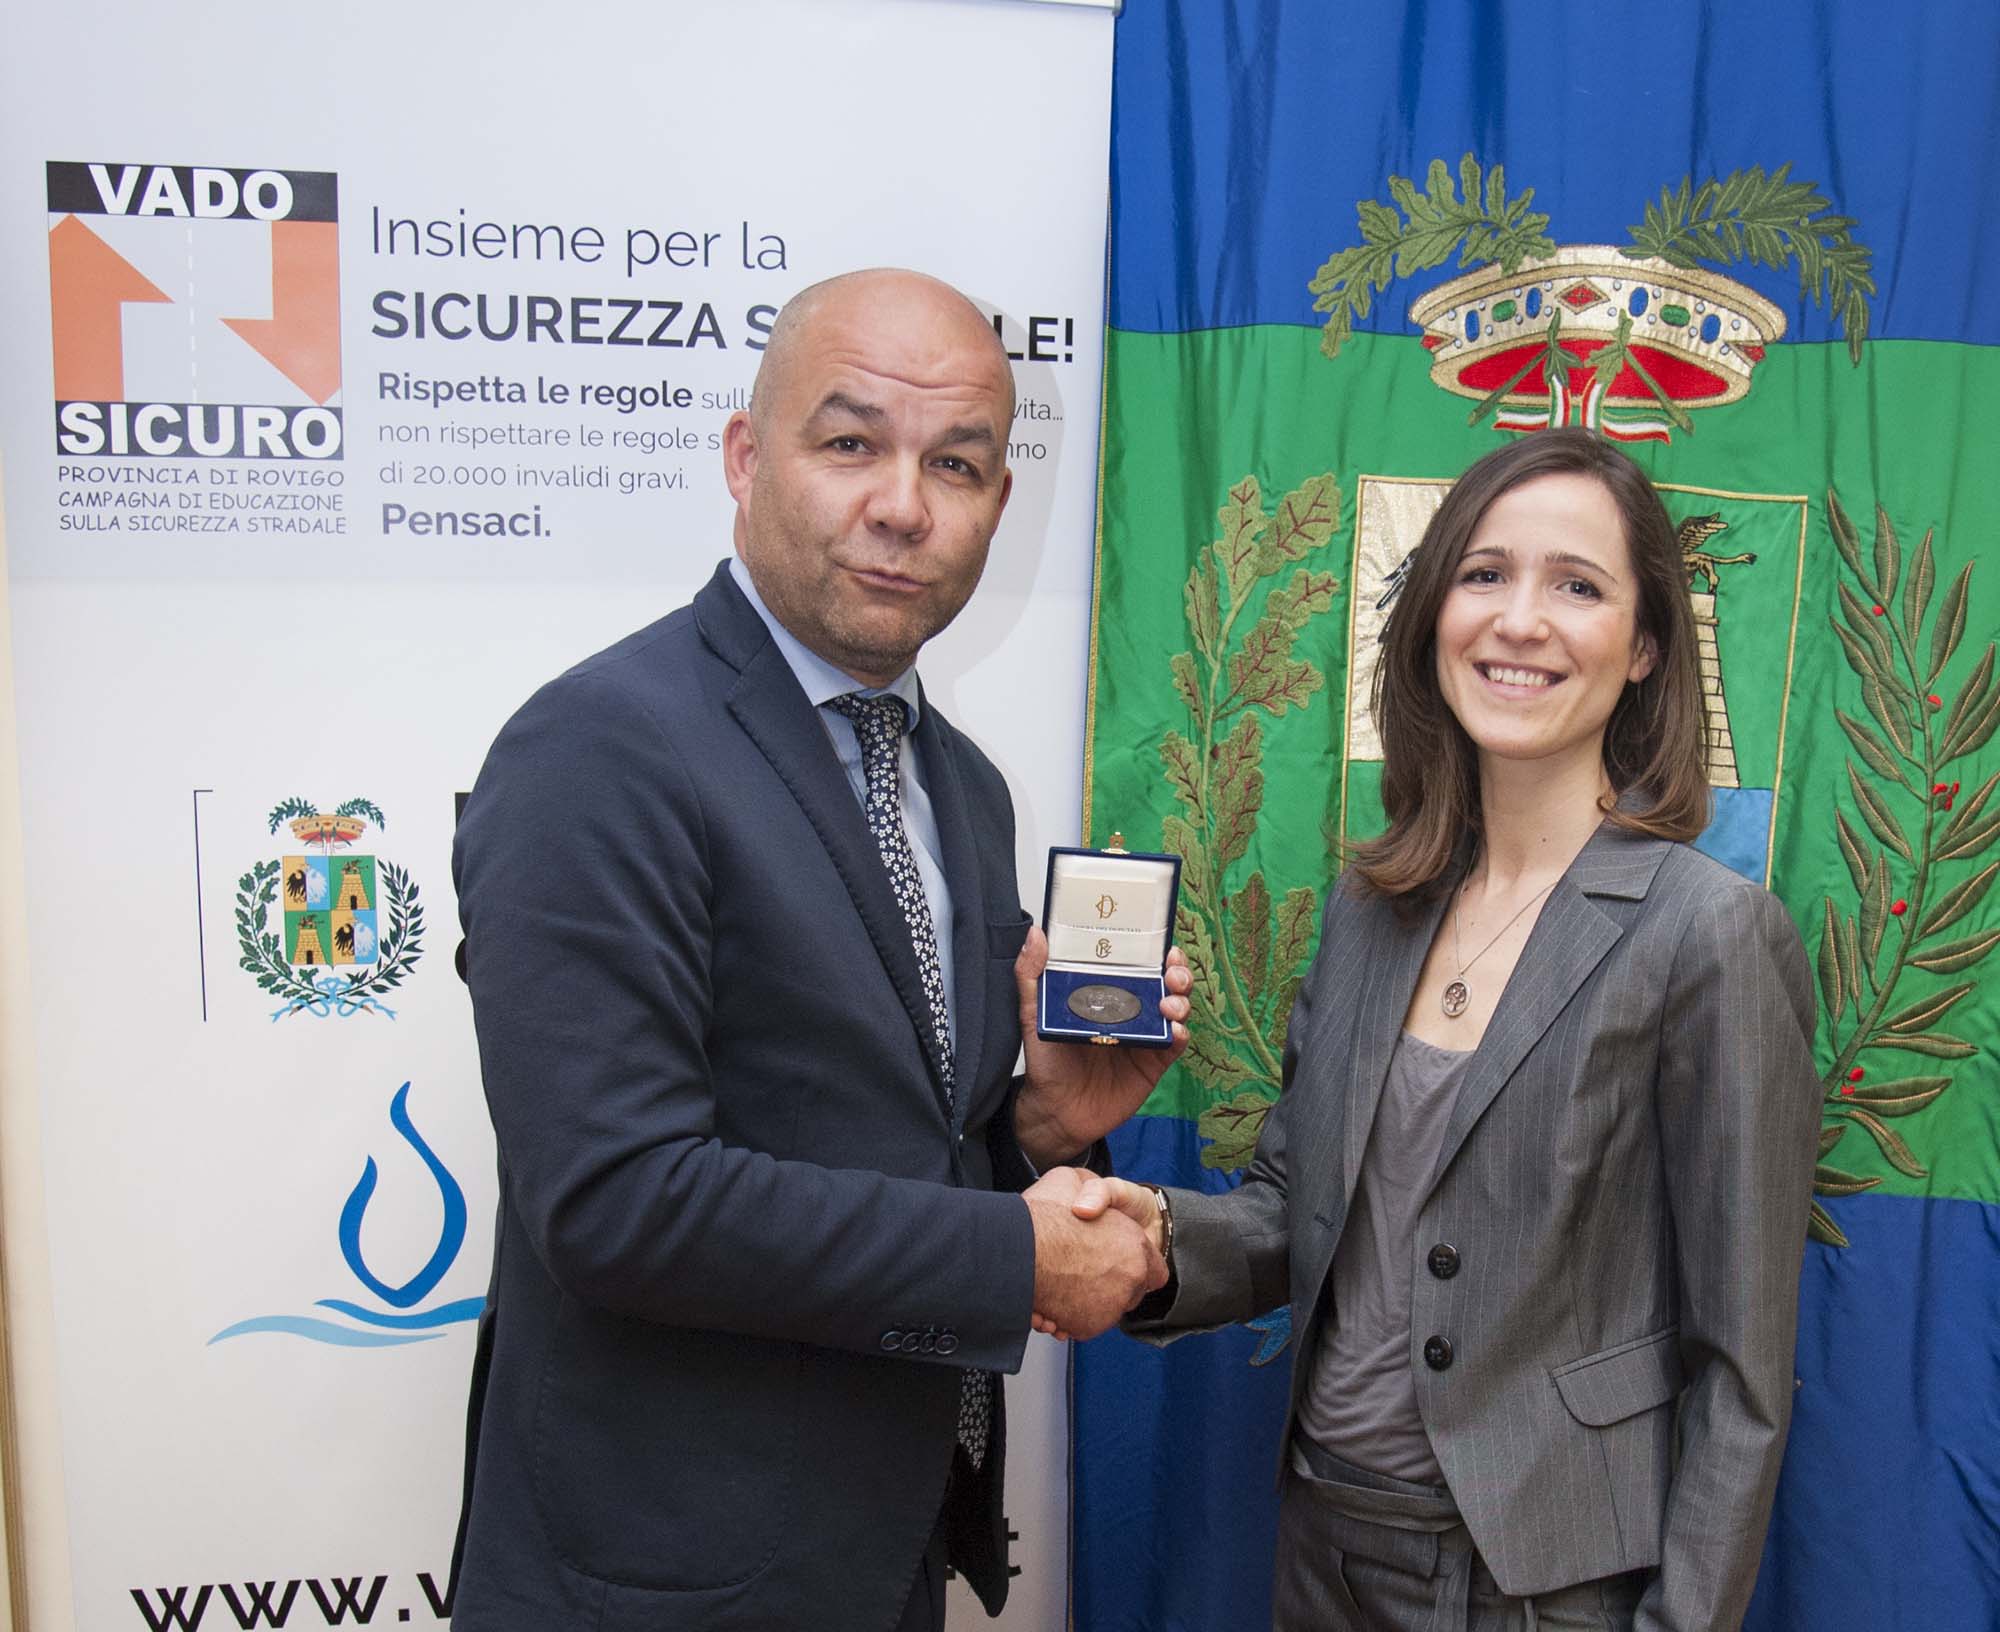 Adriatic LNG and Vado Sicuro awarded again by the Chamber of Deputies 